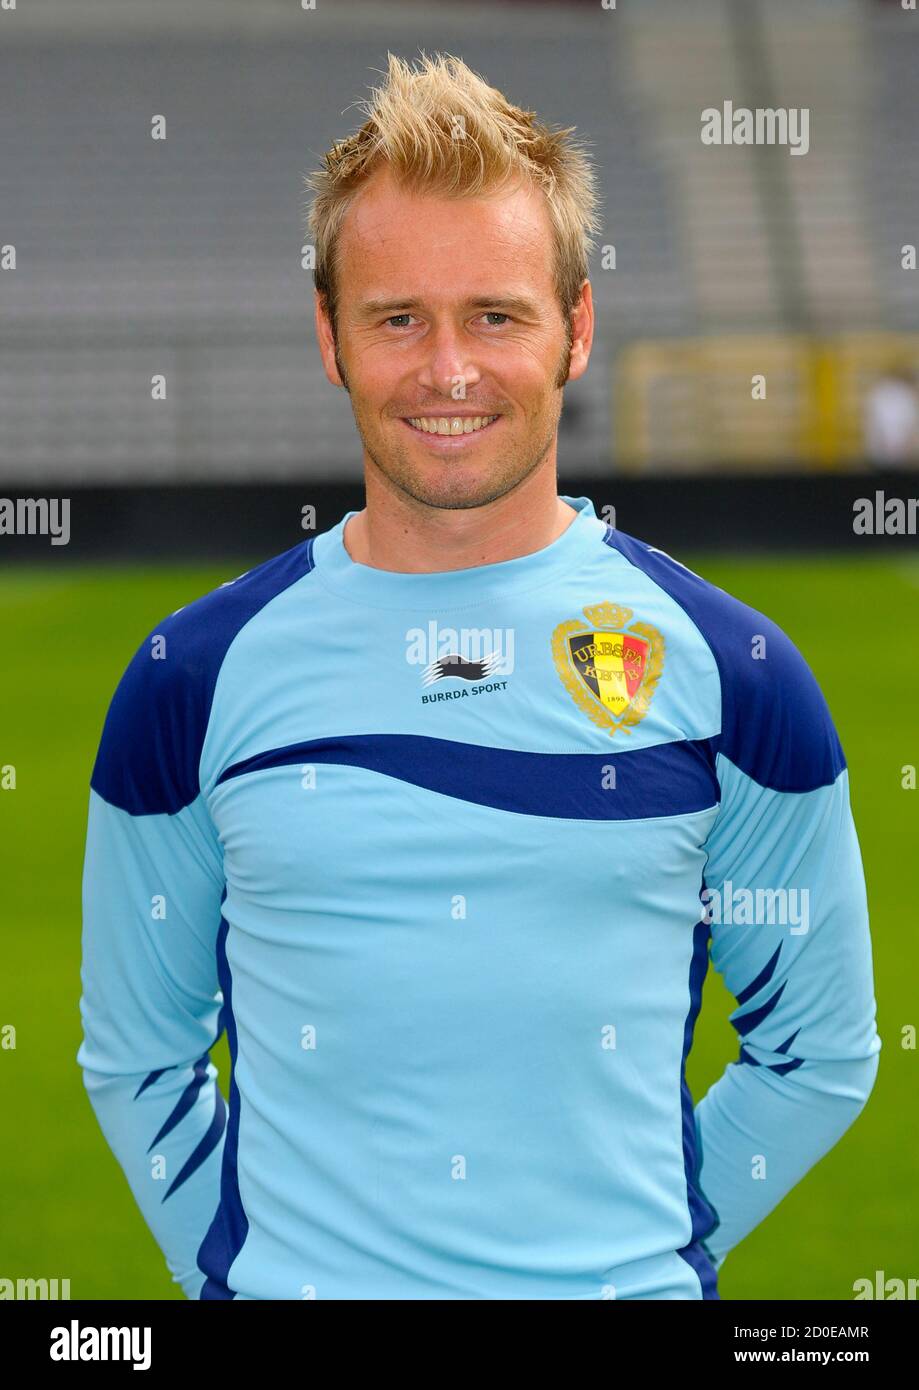 Belgium's Jean Francois Gillet poses for a photo prior to a training  session ahead of their August 15 friendly soccer match against Netherlands  in Brussels August 14, 2012. REUTERS/Laurent Dubrule (BELGIUM -